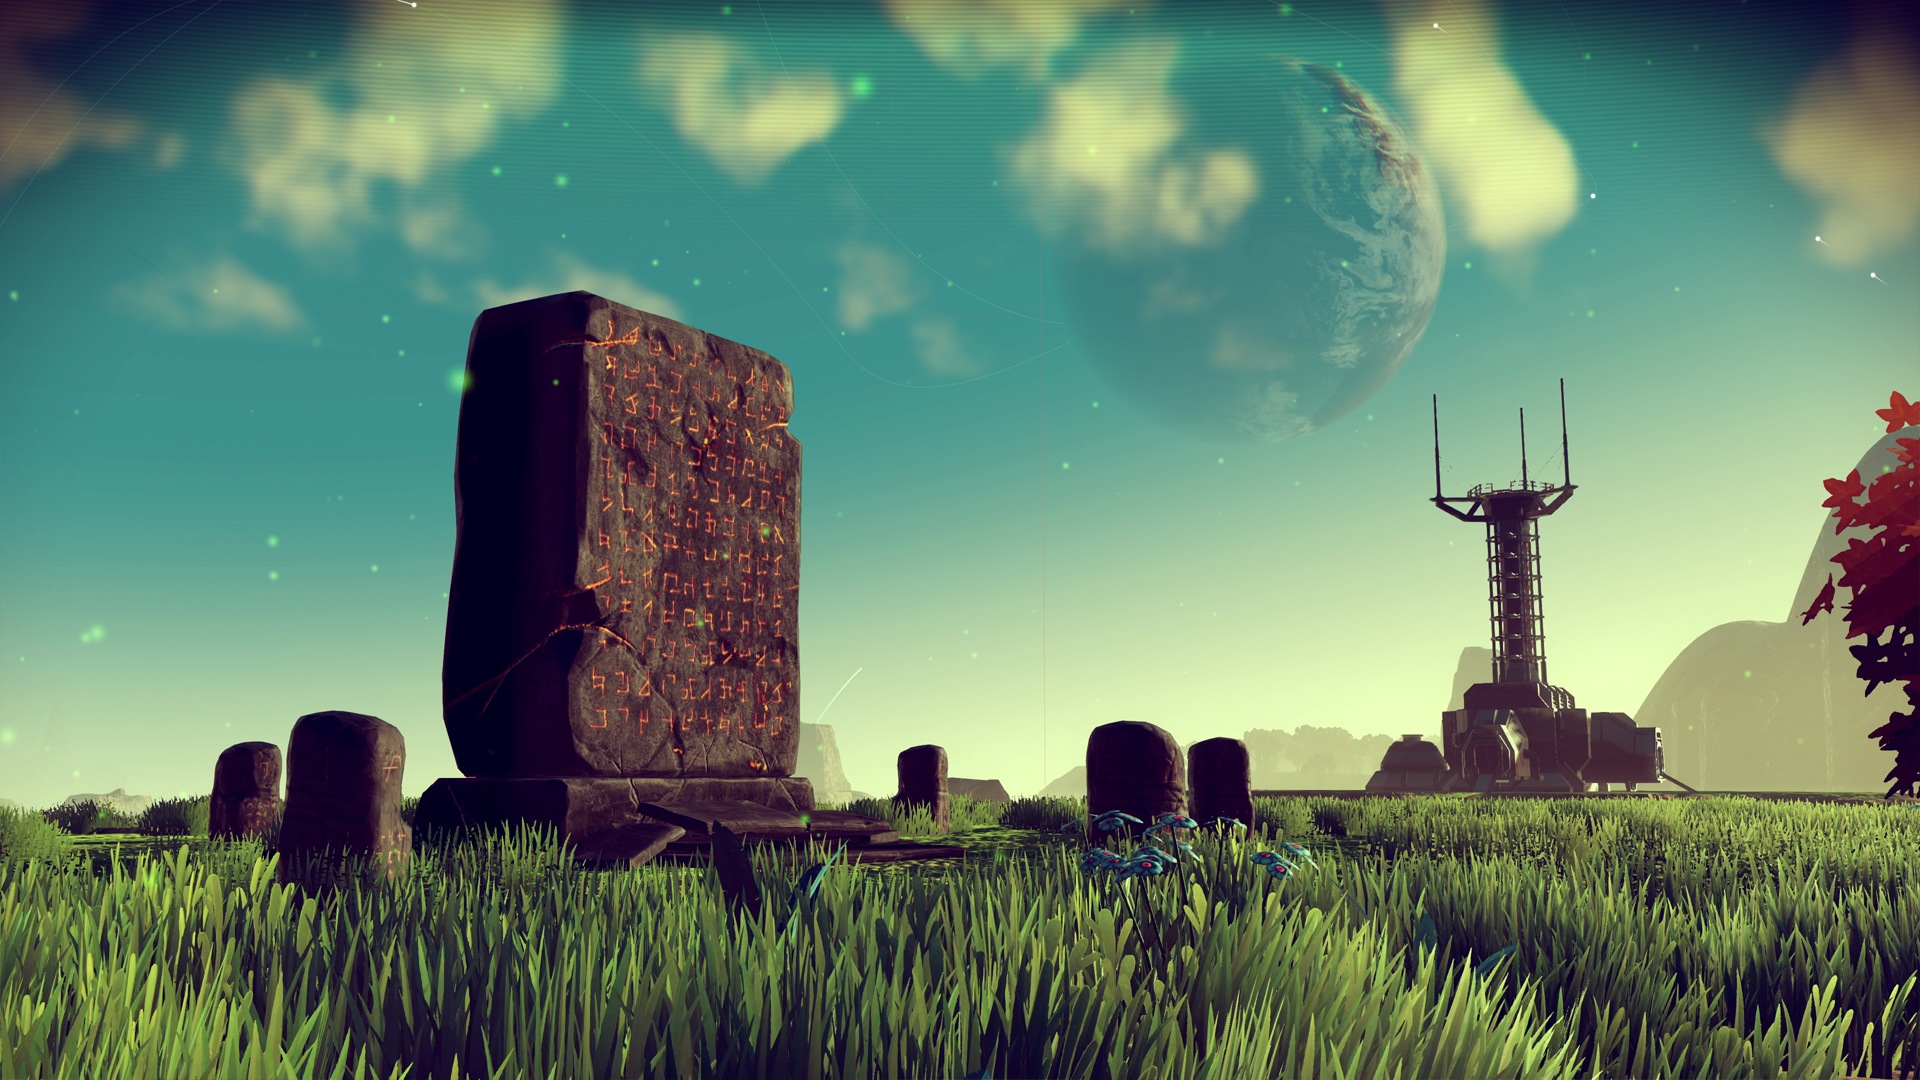 No Man’s Sky Release Date and More Details Revealed